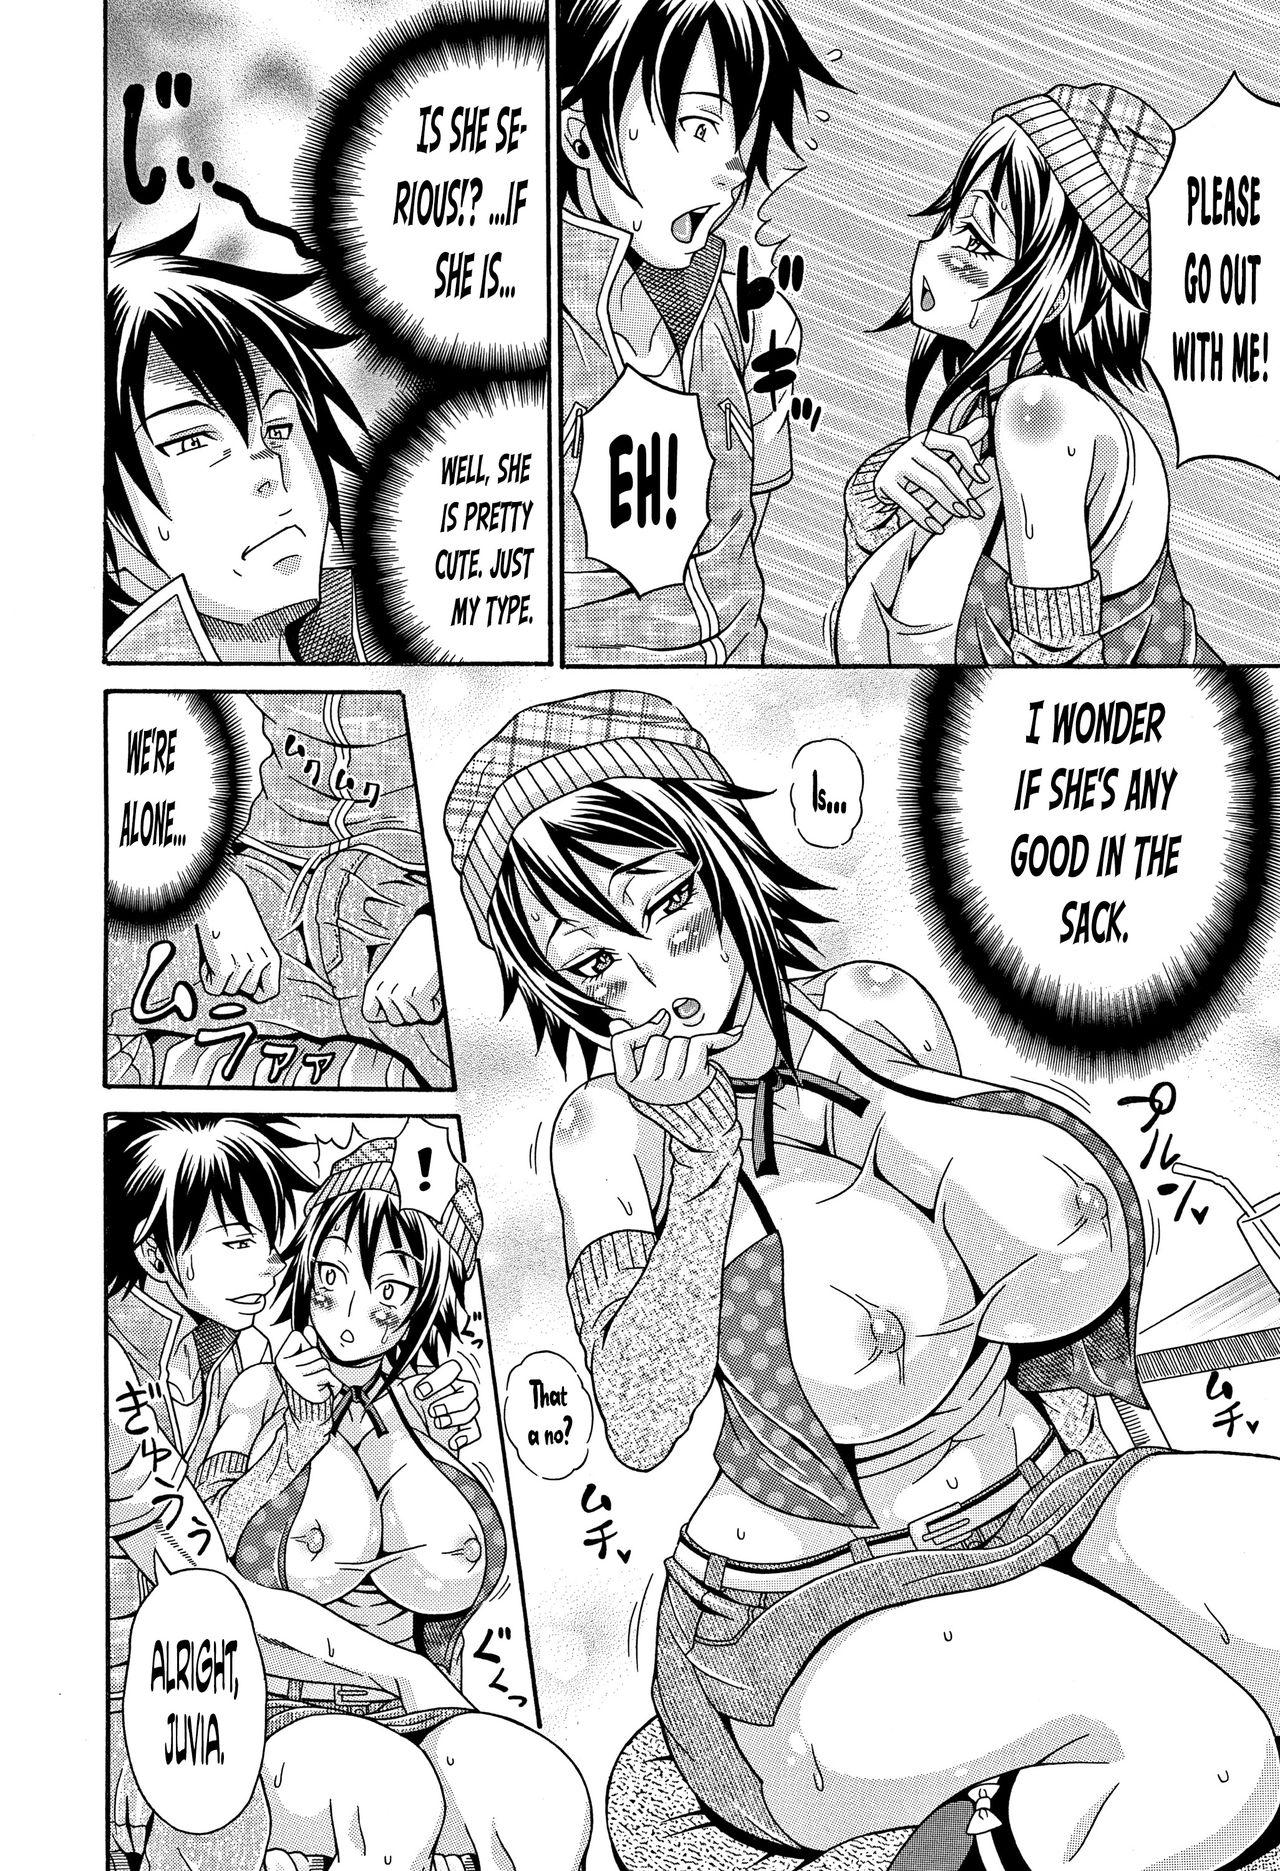 [Andou Hiroyuki] Mamire Chichi - Sticky Tits Feel Hot All Over. Ch.1-5 [English] [doujin-moe.us] 58